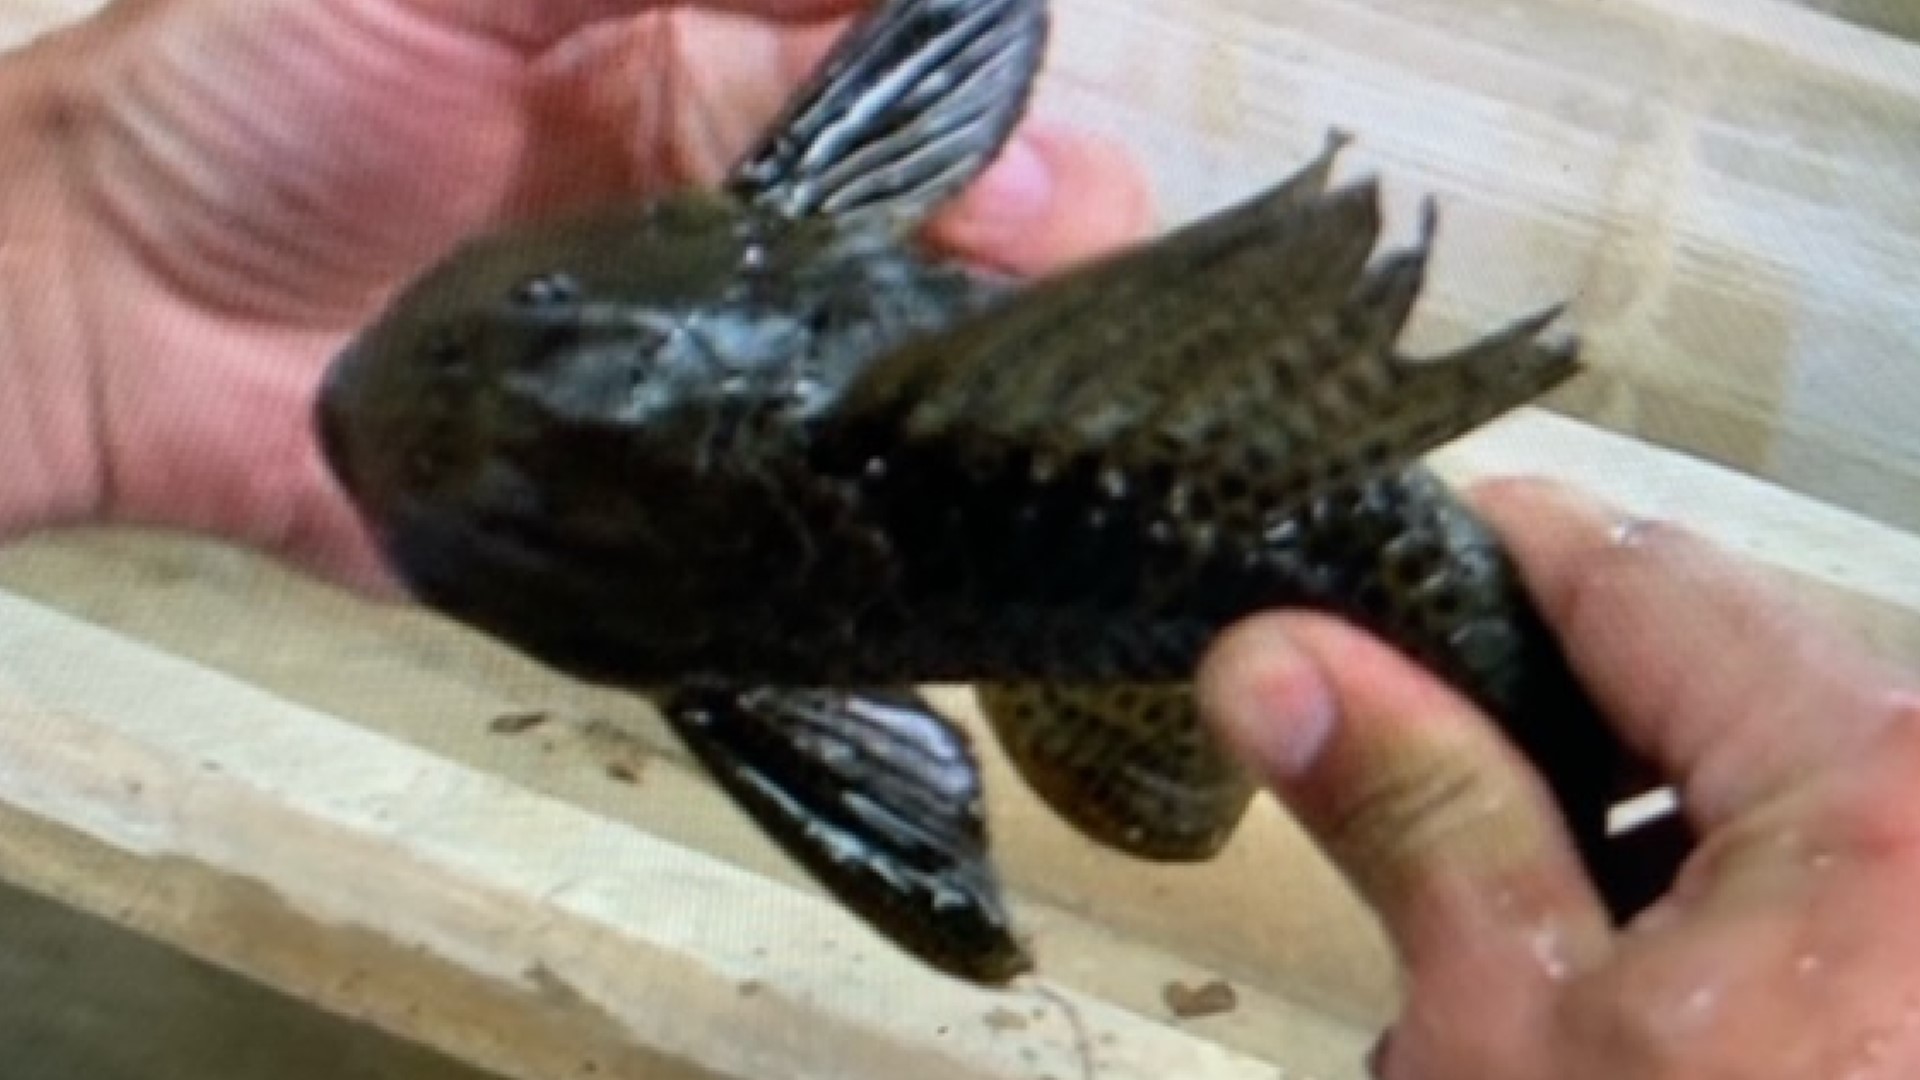 Hypostomus plecostomus, also known as the suckermouth or armored catfish, is a native of South America, but their takeover of U.S. waterways is aggressive.